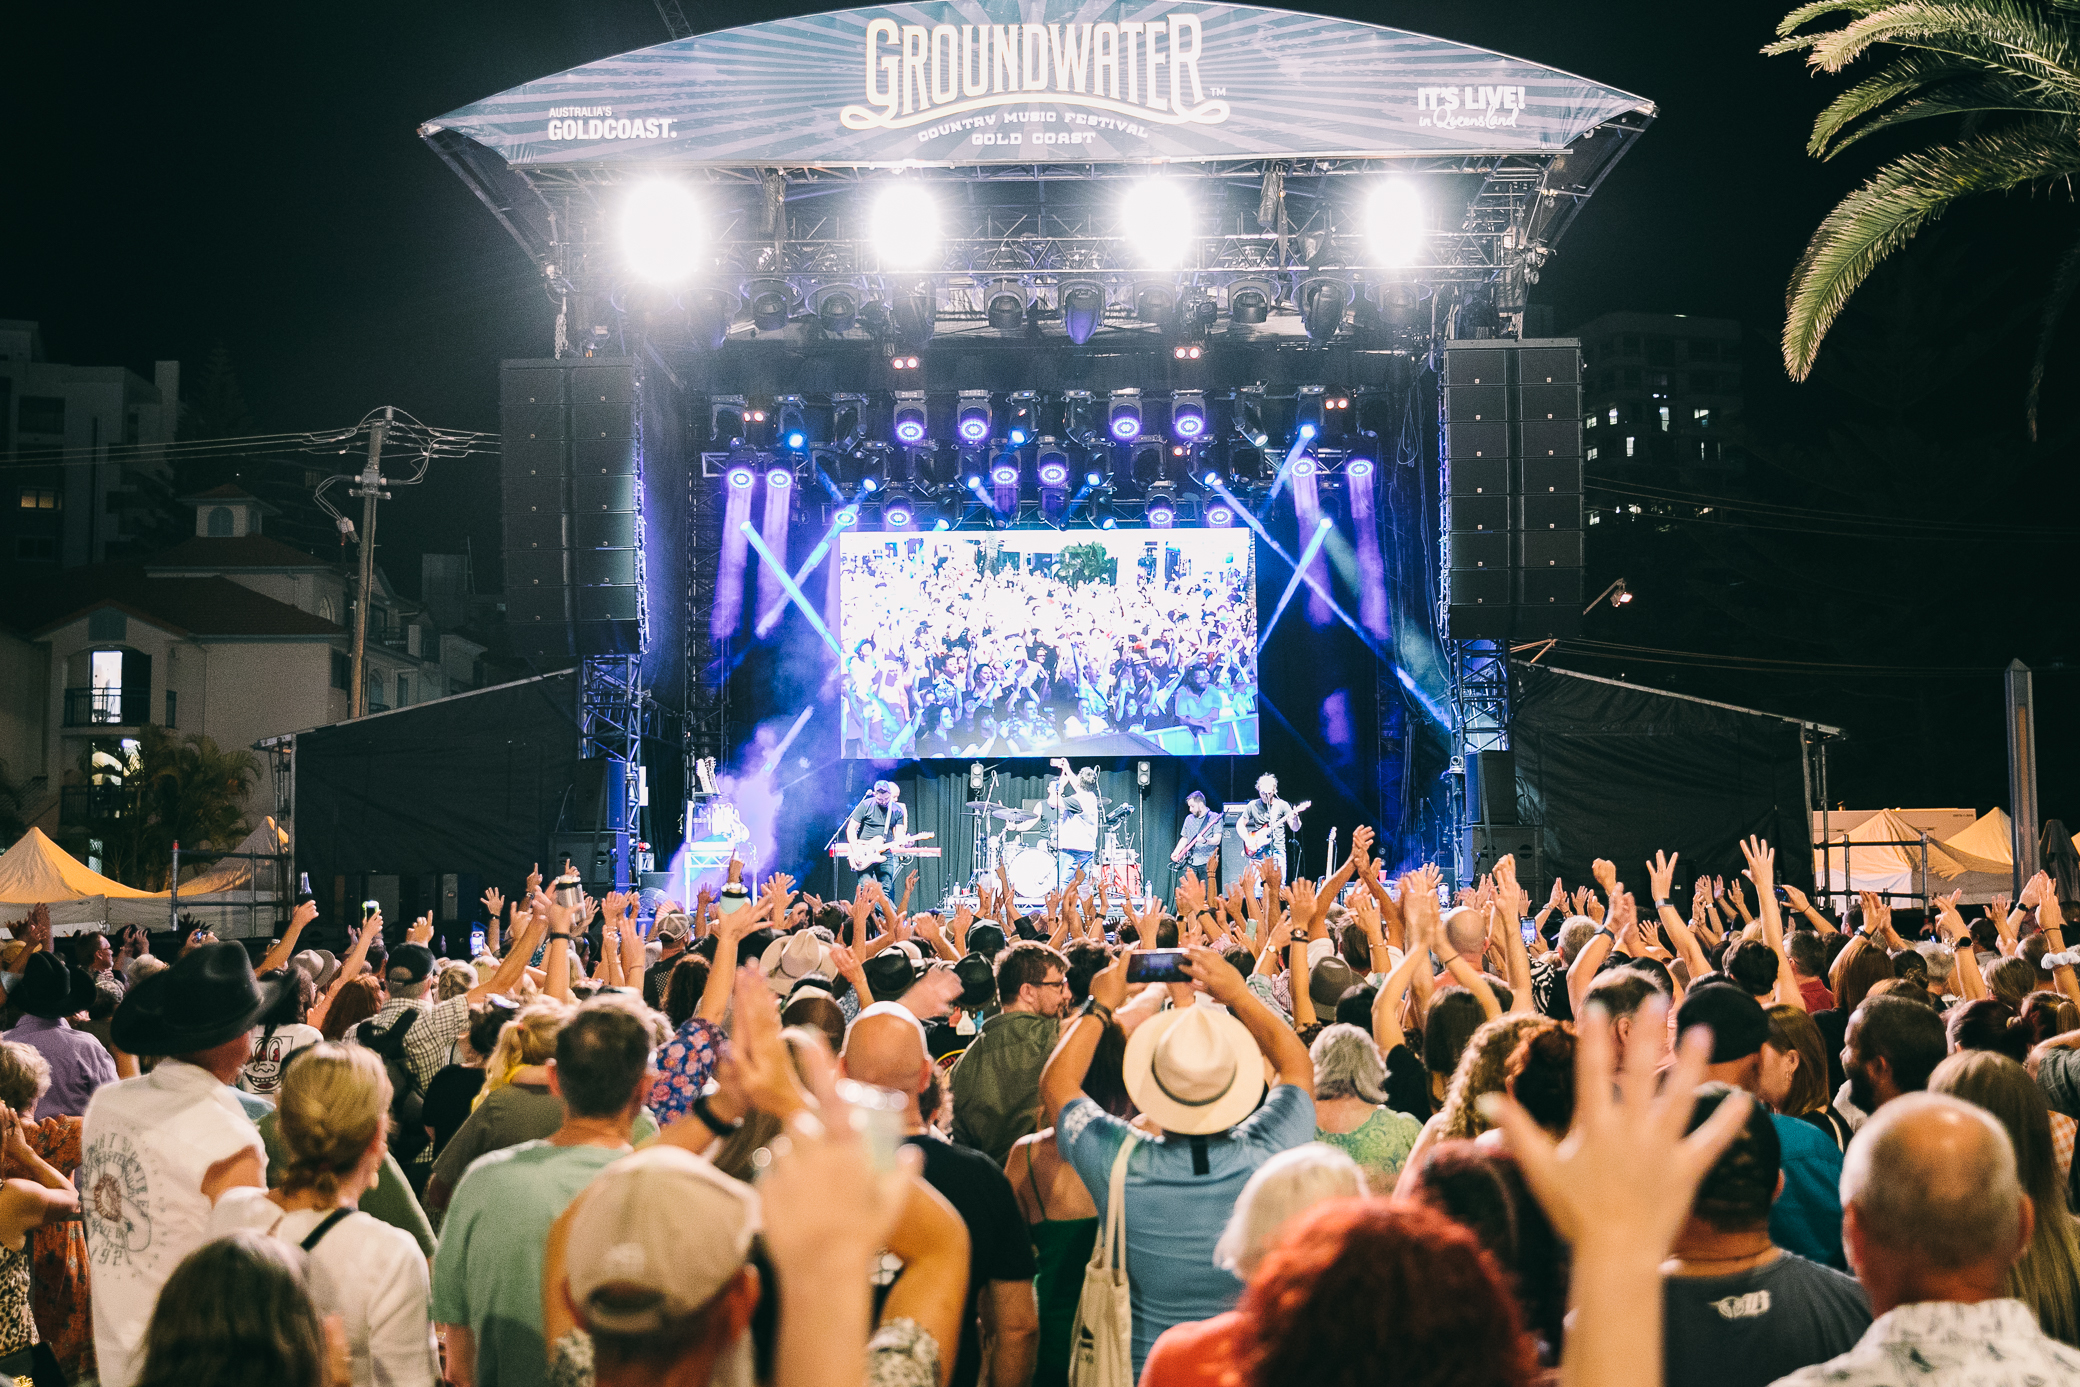 Groundwater CMF celebrates ten years of country music on the Gold Coast